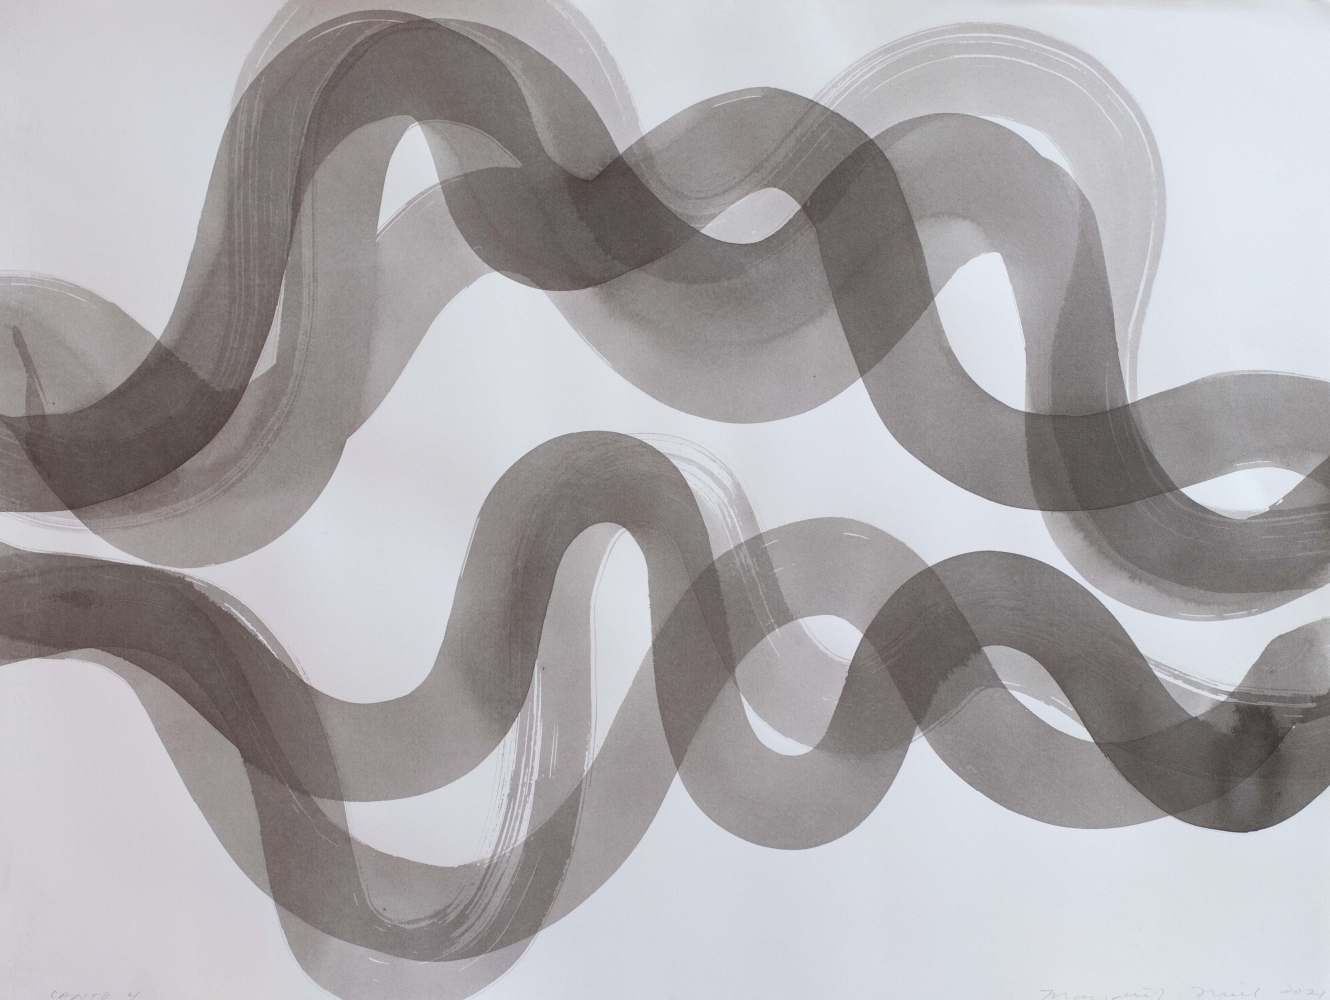 Margaret Neill, Canto 4, 2021, Ink on paper, 20 x 29.5 inches, black and white abstract art